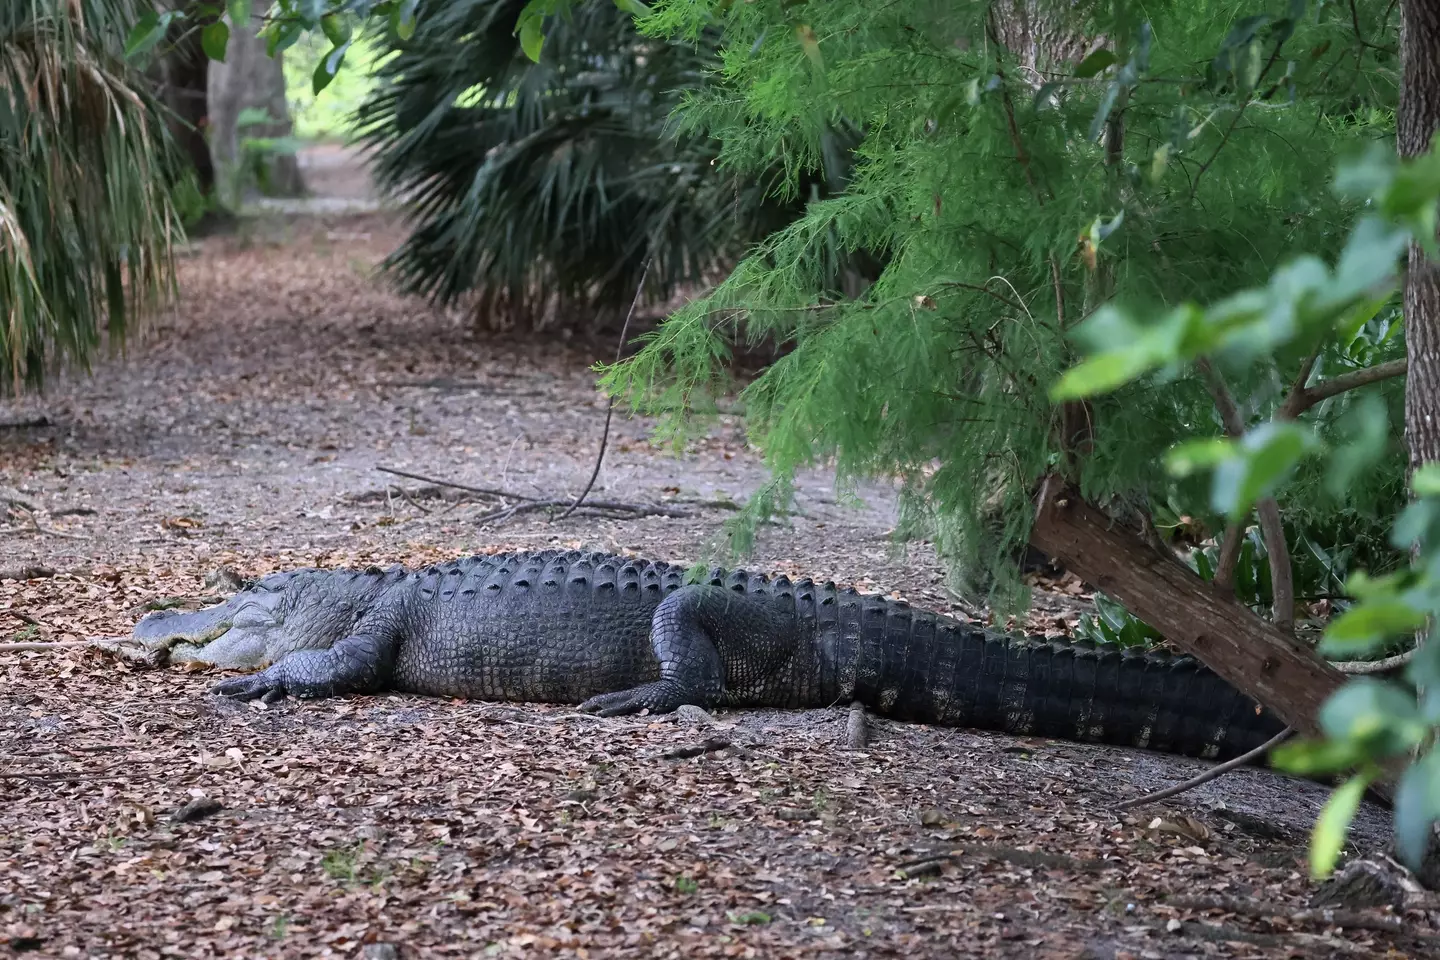 A 69-year-old woman has been attacked and killed by an alligator.